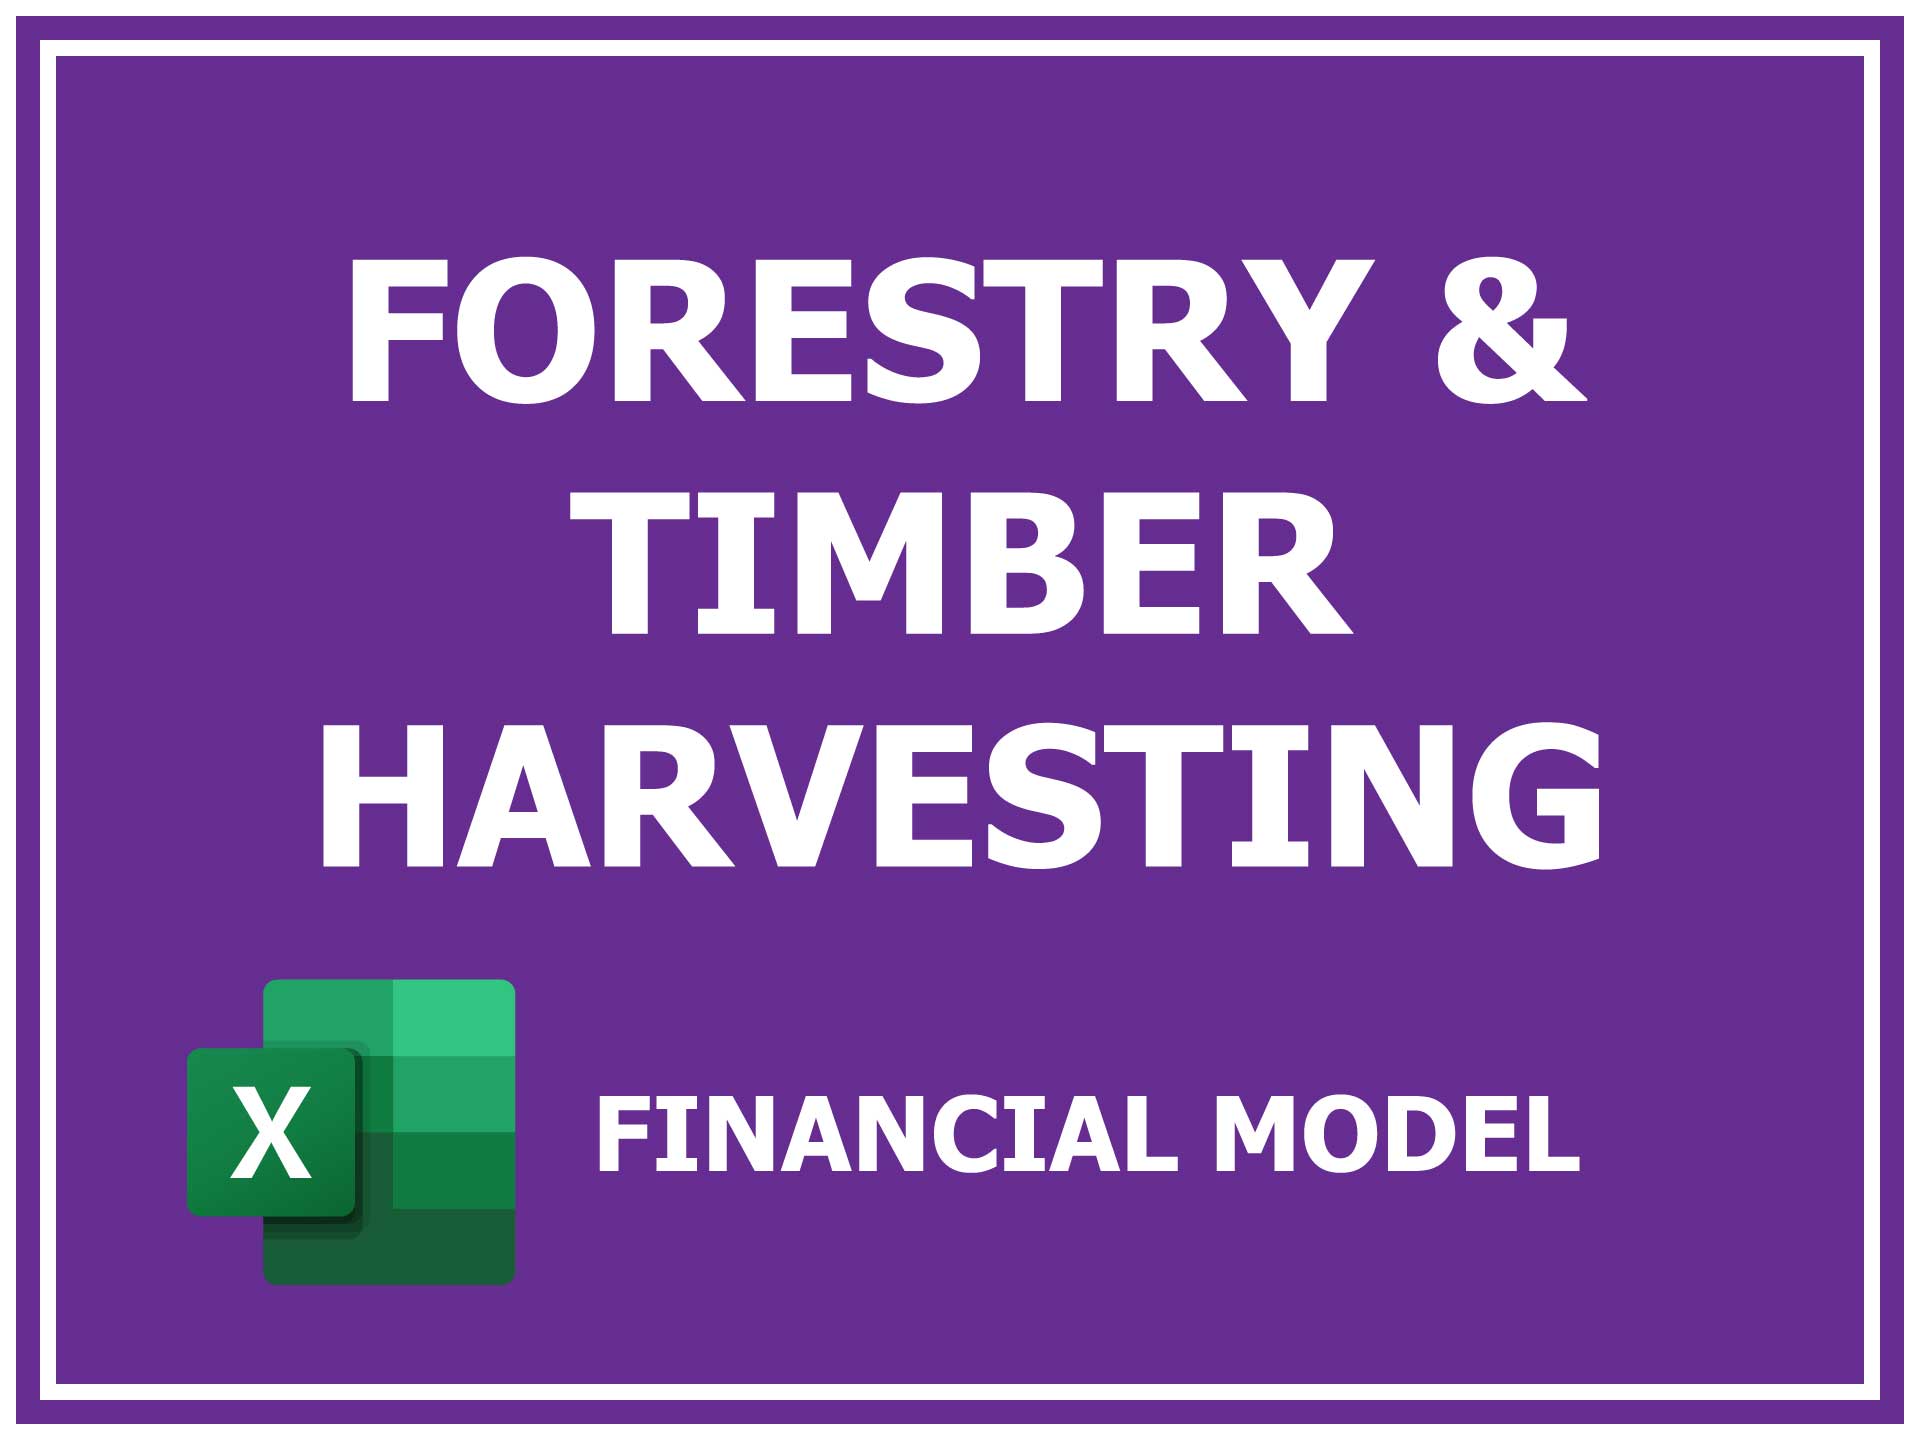 Forestry & Timber Harvesting